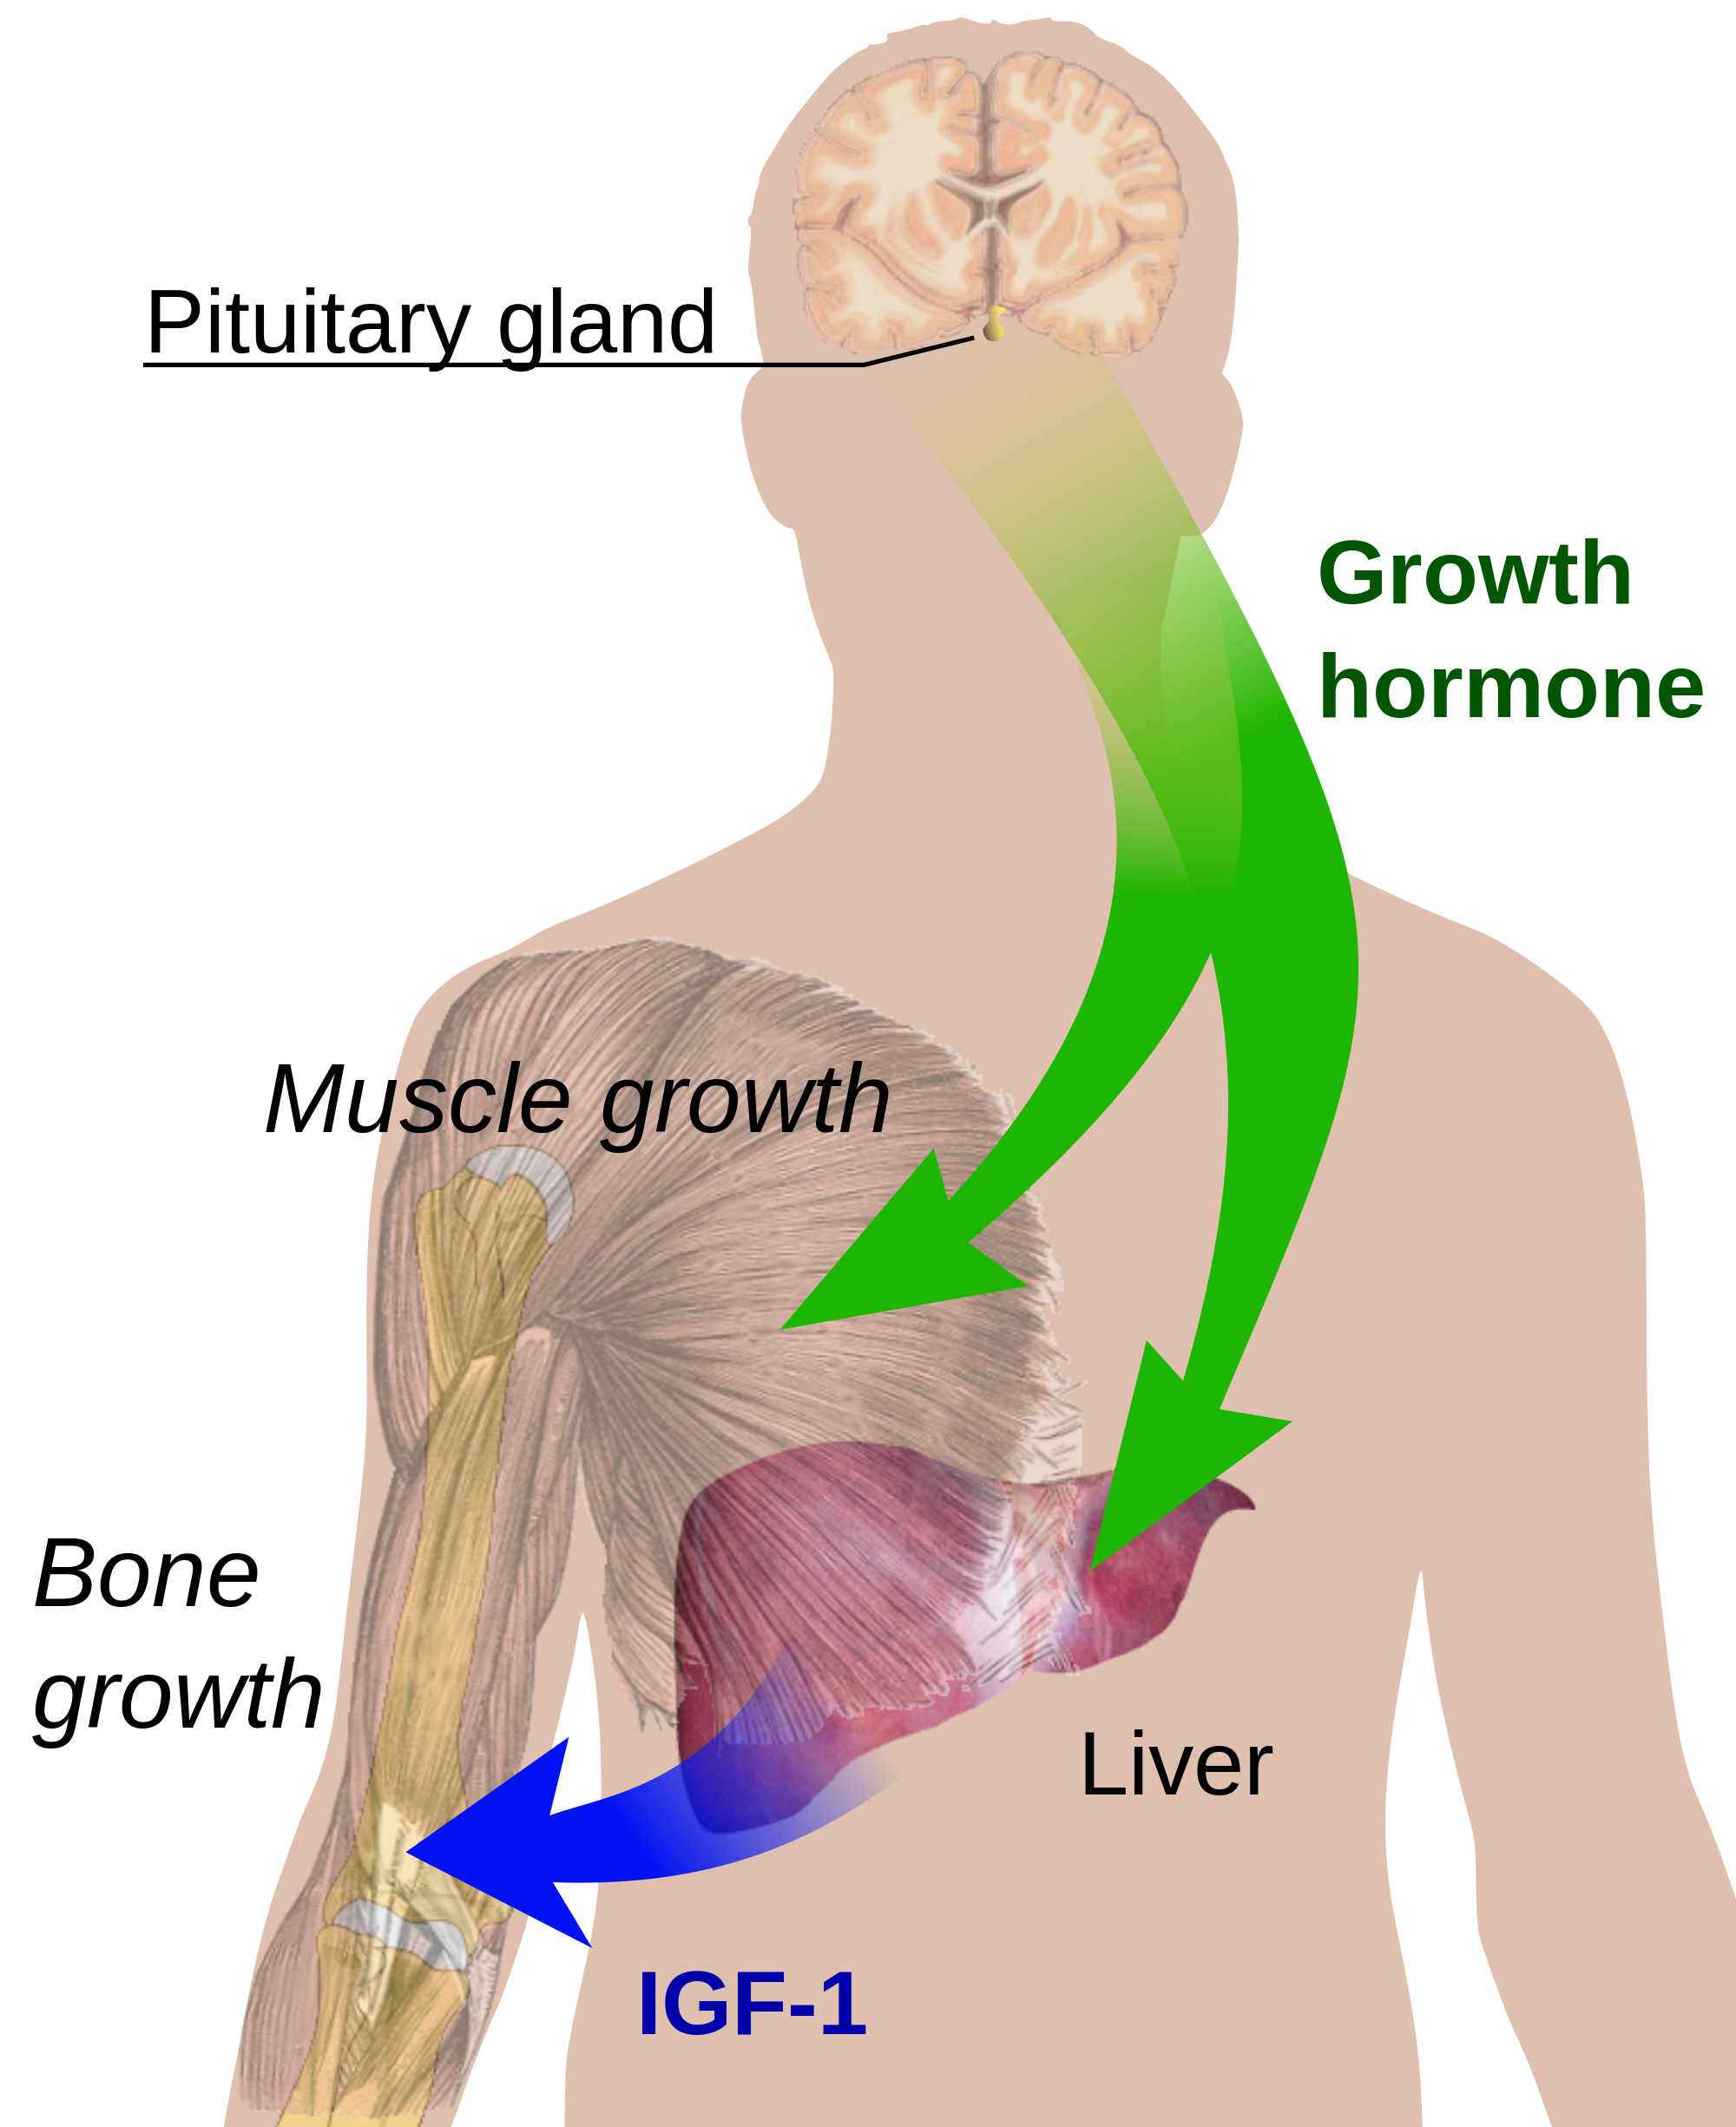 File:Growth liver.png